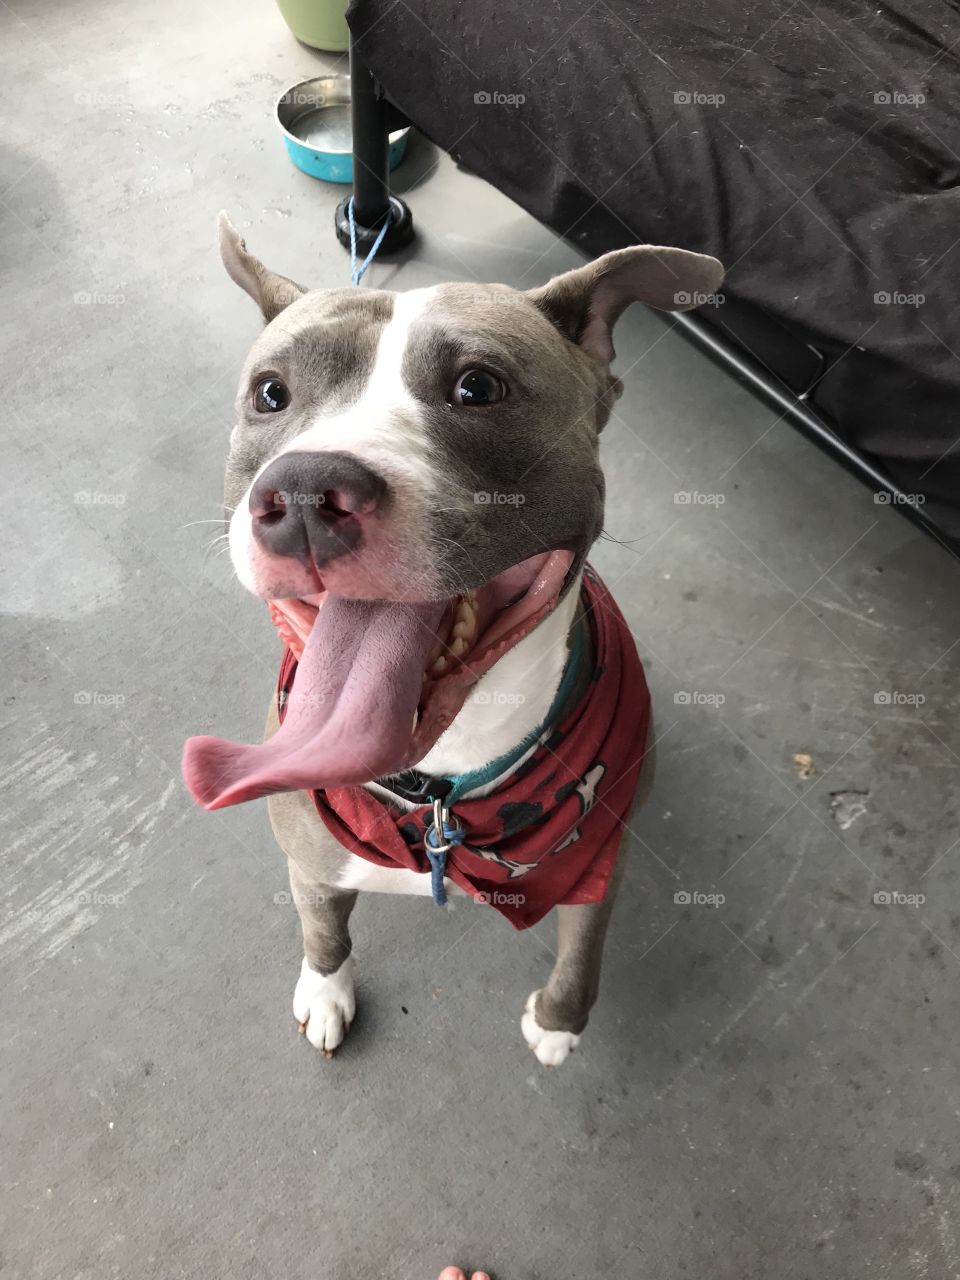 Adorable Happy Pitbull Face - Friendly Dog with Tongue Sticking Out - Incredibly Sweet Puppy Boop